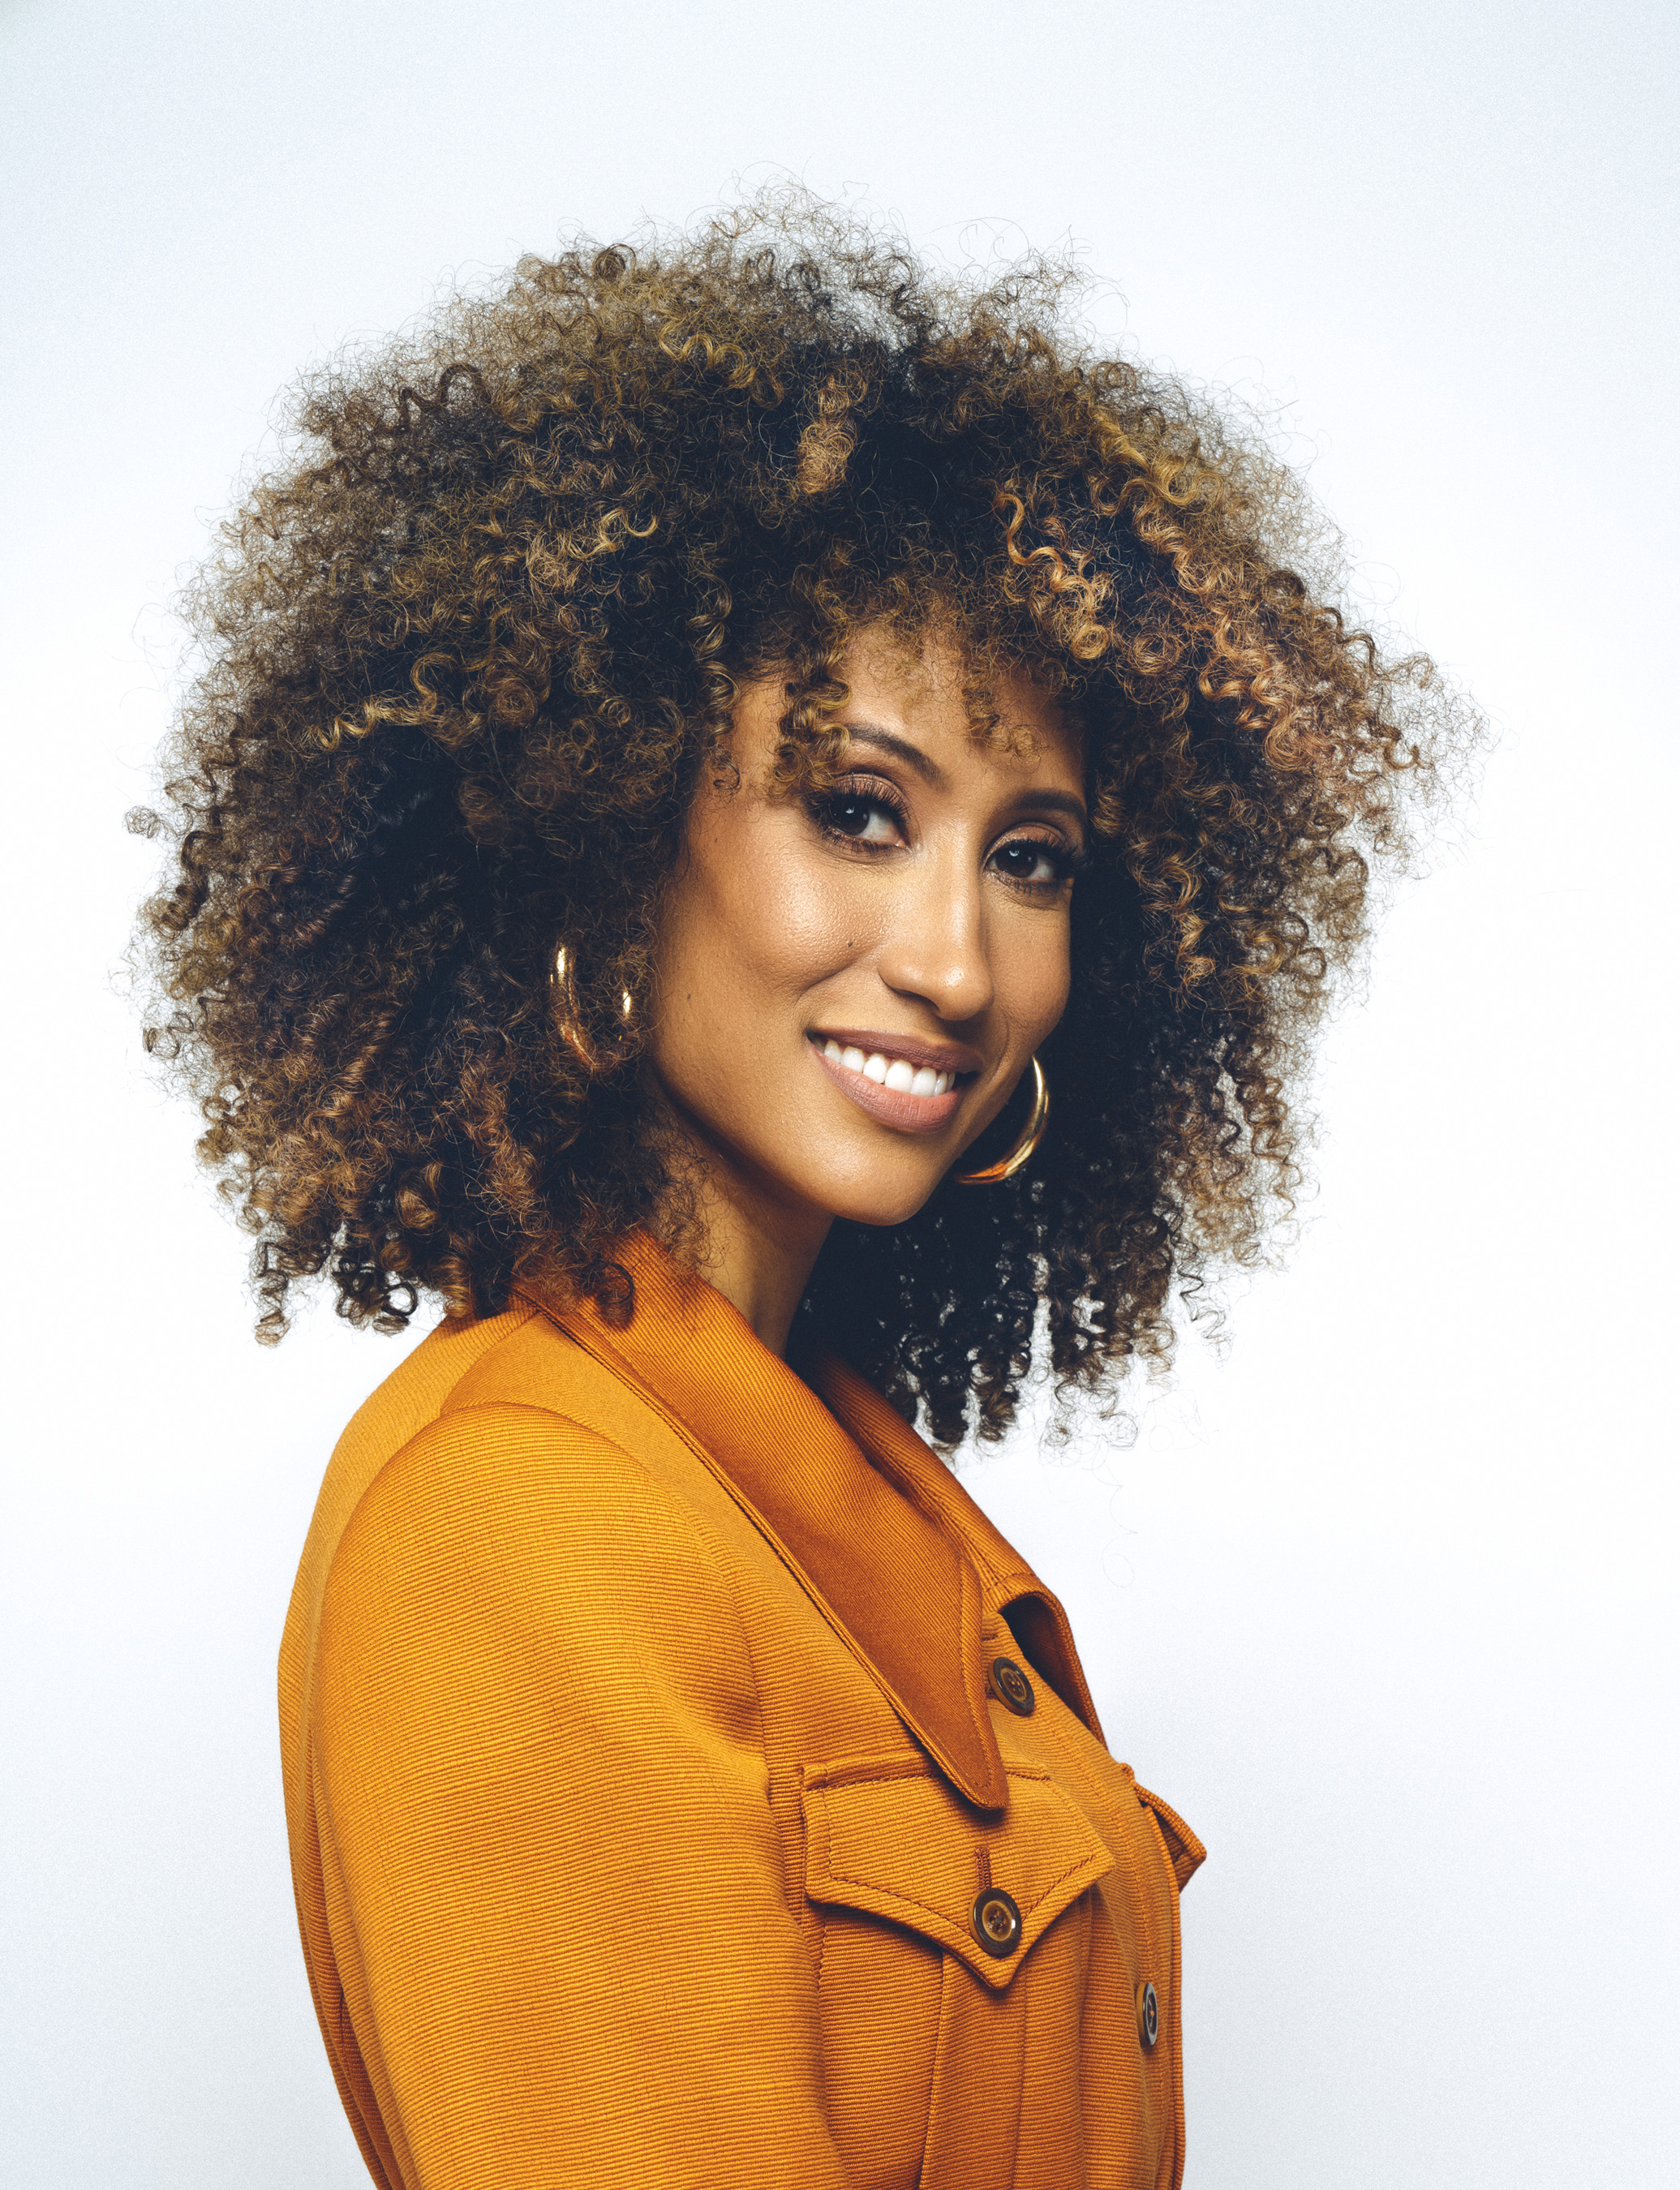 Elaine Welteroth teams up with Jane Walker by Johnnie Walker for First Women campaign celebrating and inspiring women breaking boundaries.